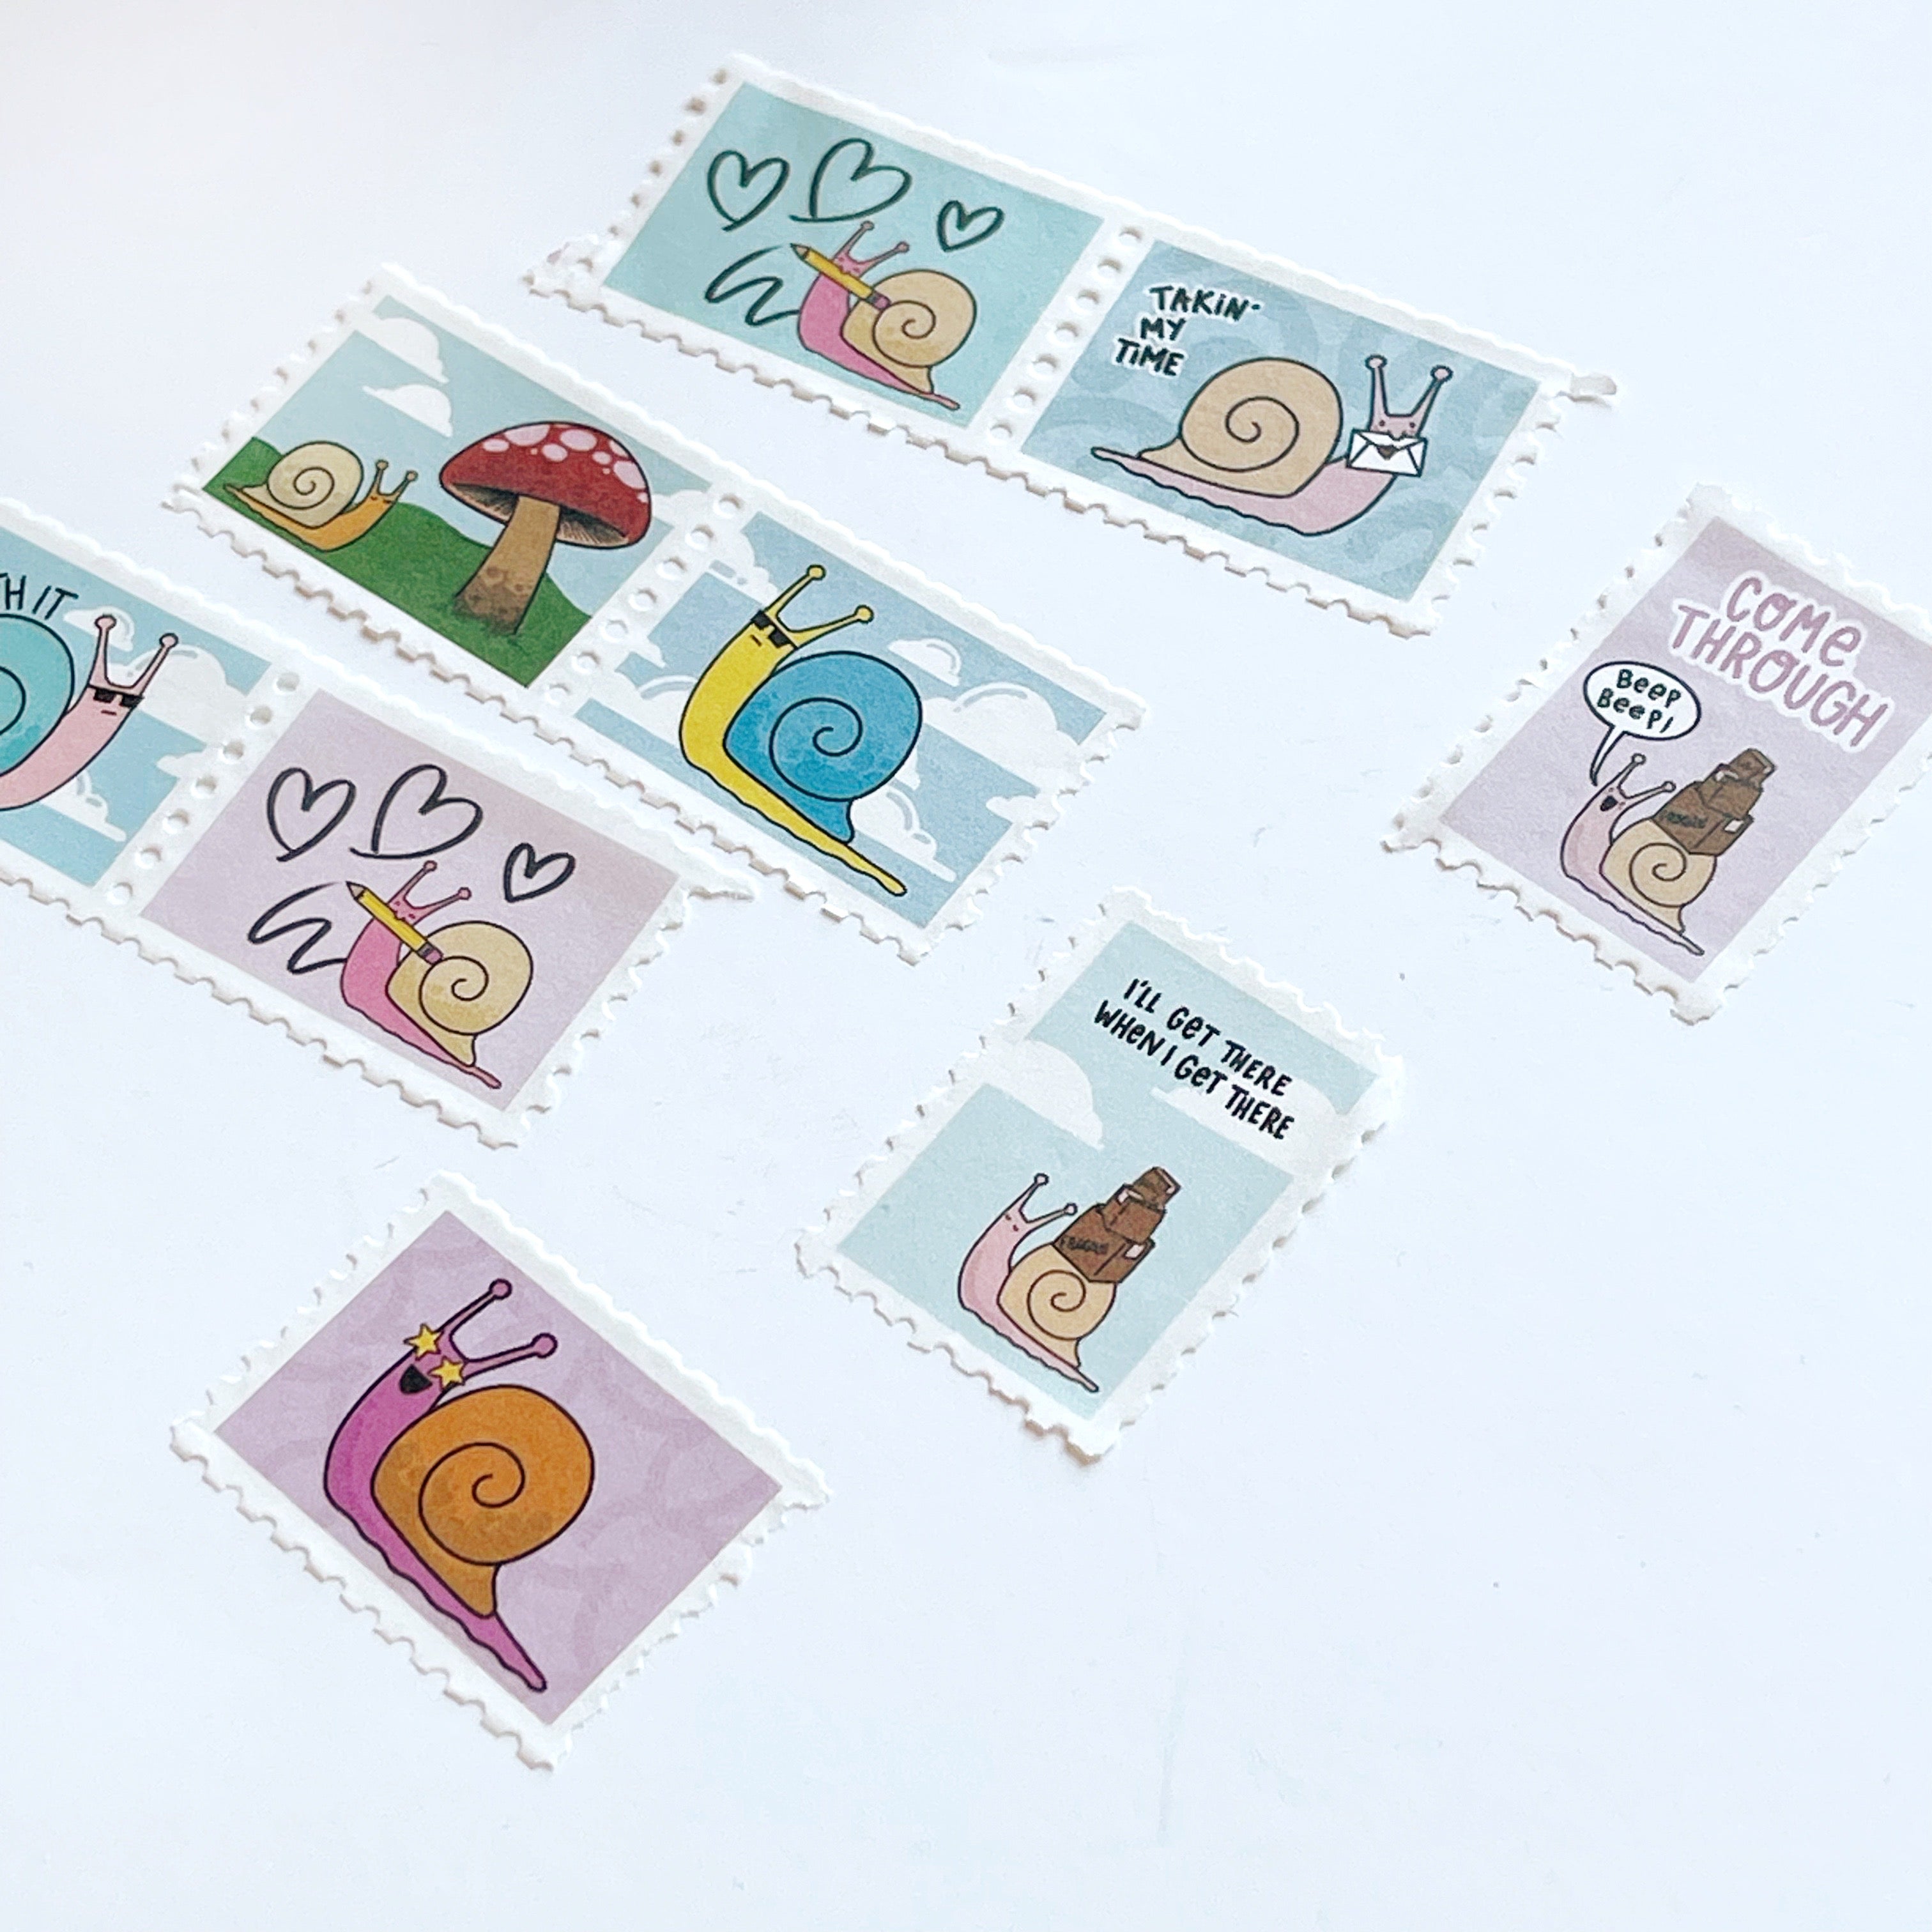 Images of stamp Washi tape with image of Ernie the snail in various scenes.